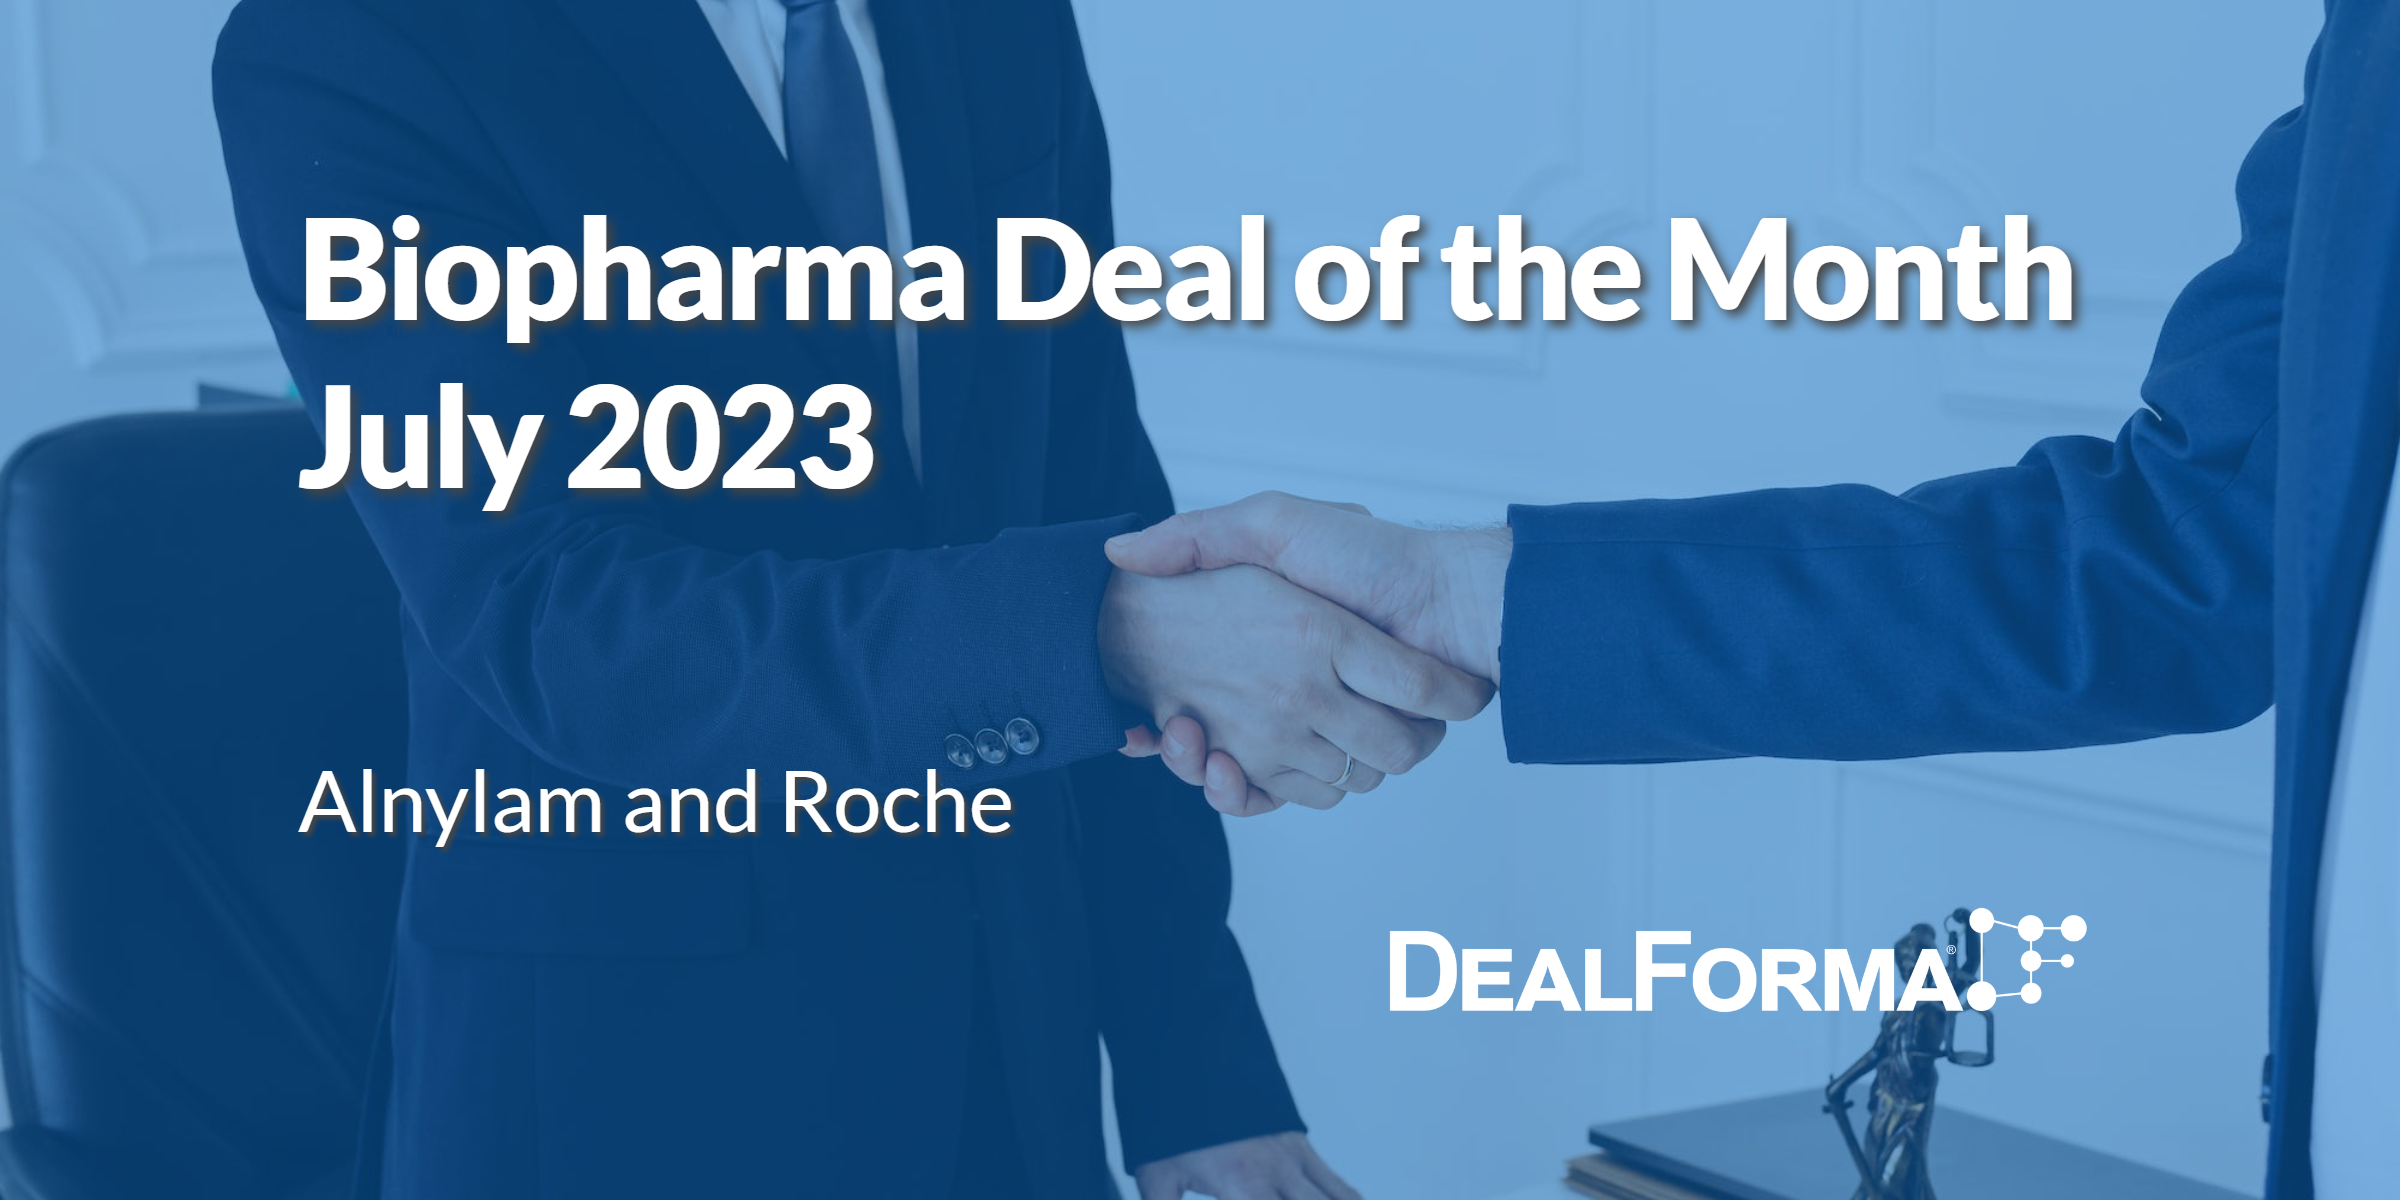 DealForma Deal of the month Alnylam and Roche